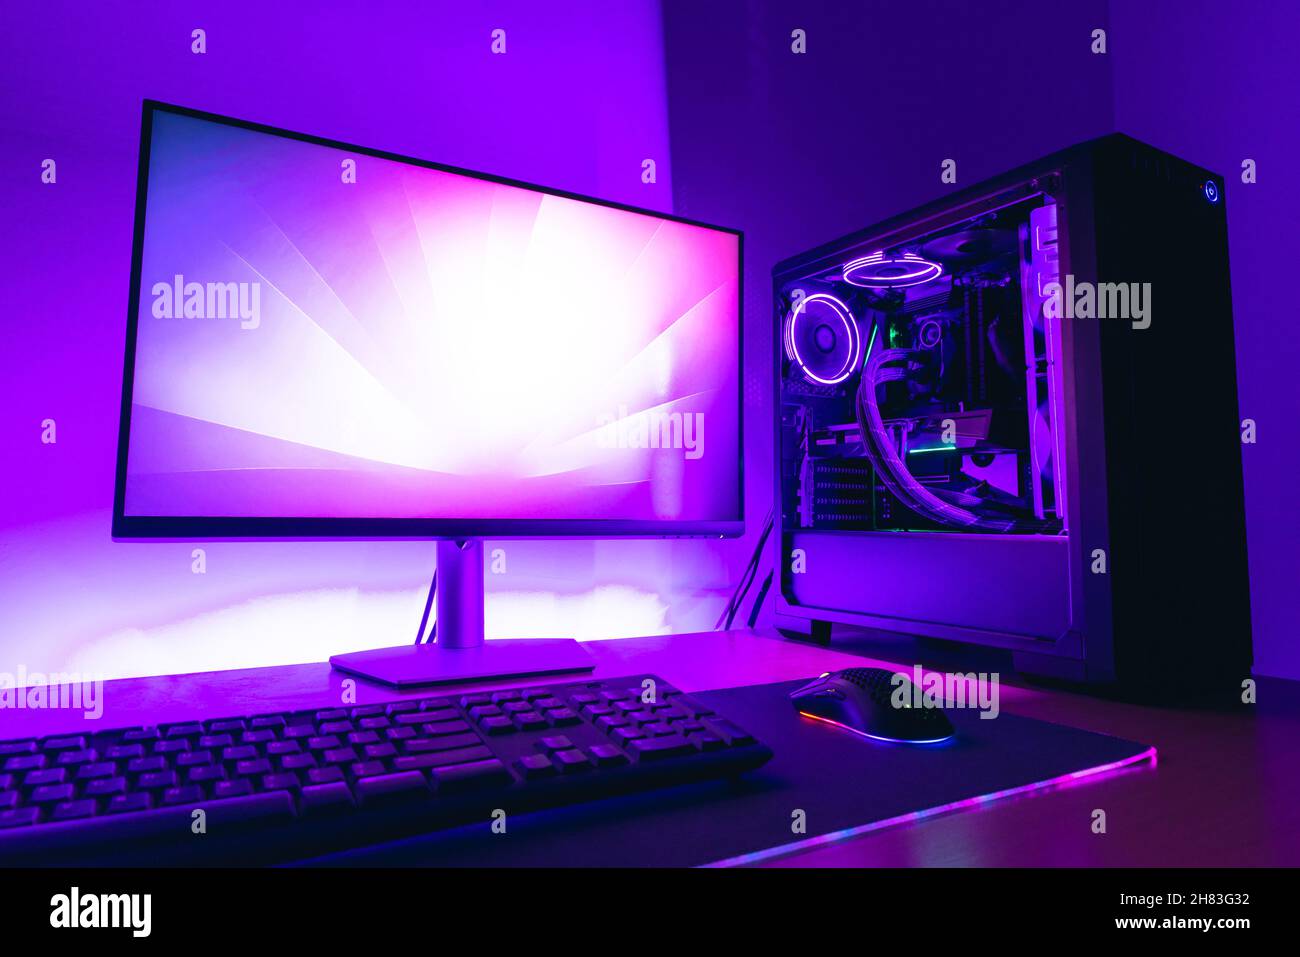 Modern gaming computer setup with display, water cooling case, keyboard, mouse on gaming mat. Purple led light in background Stock Photo